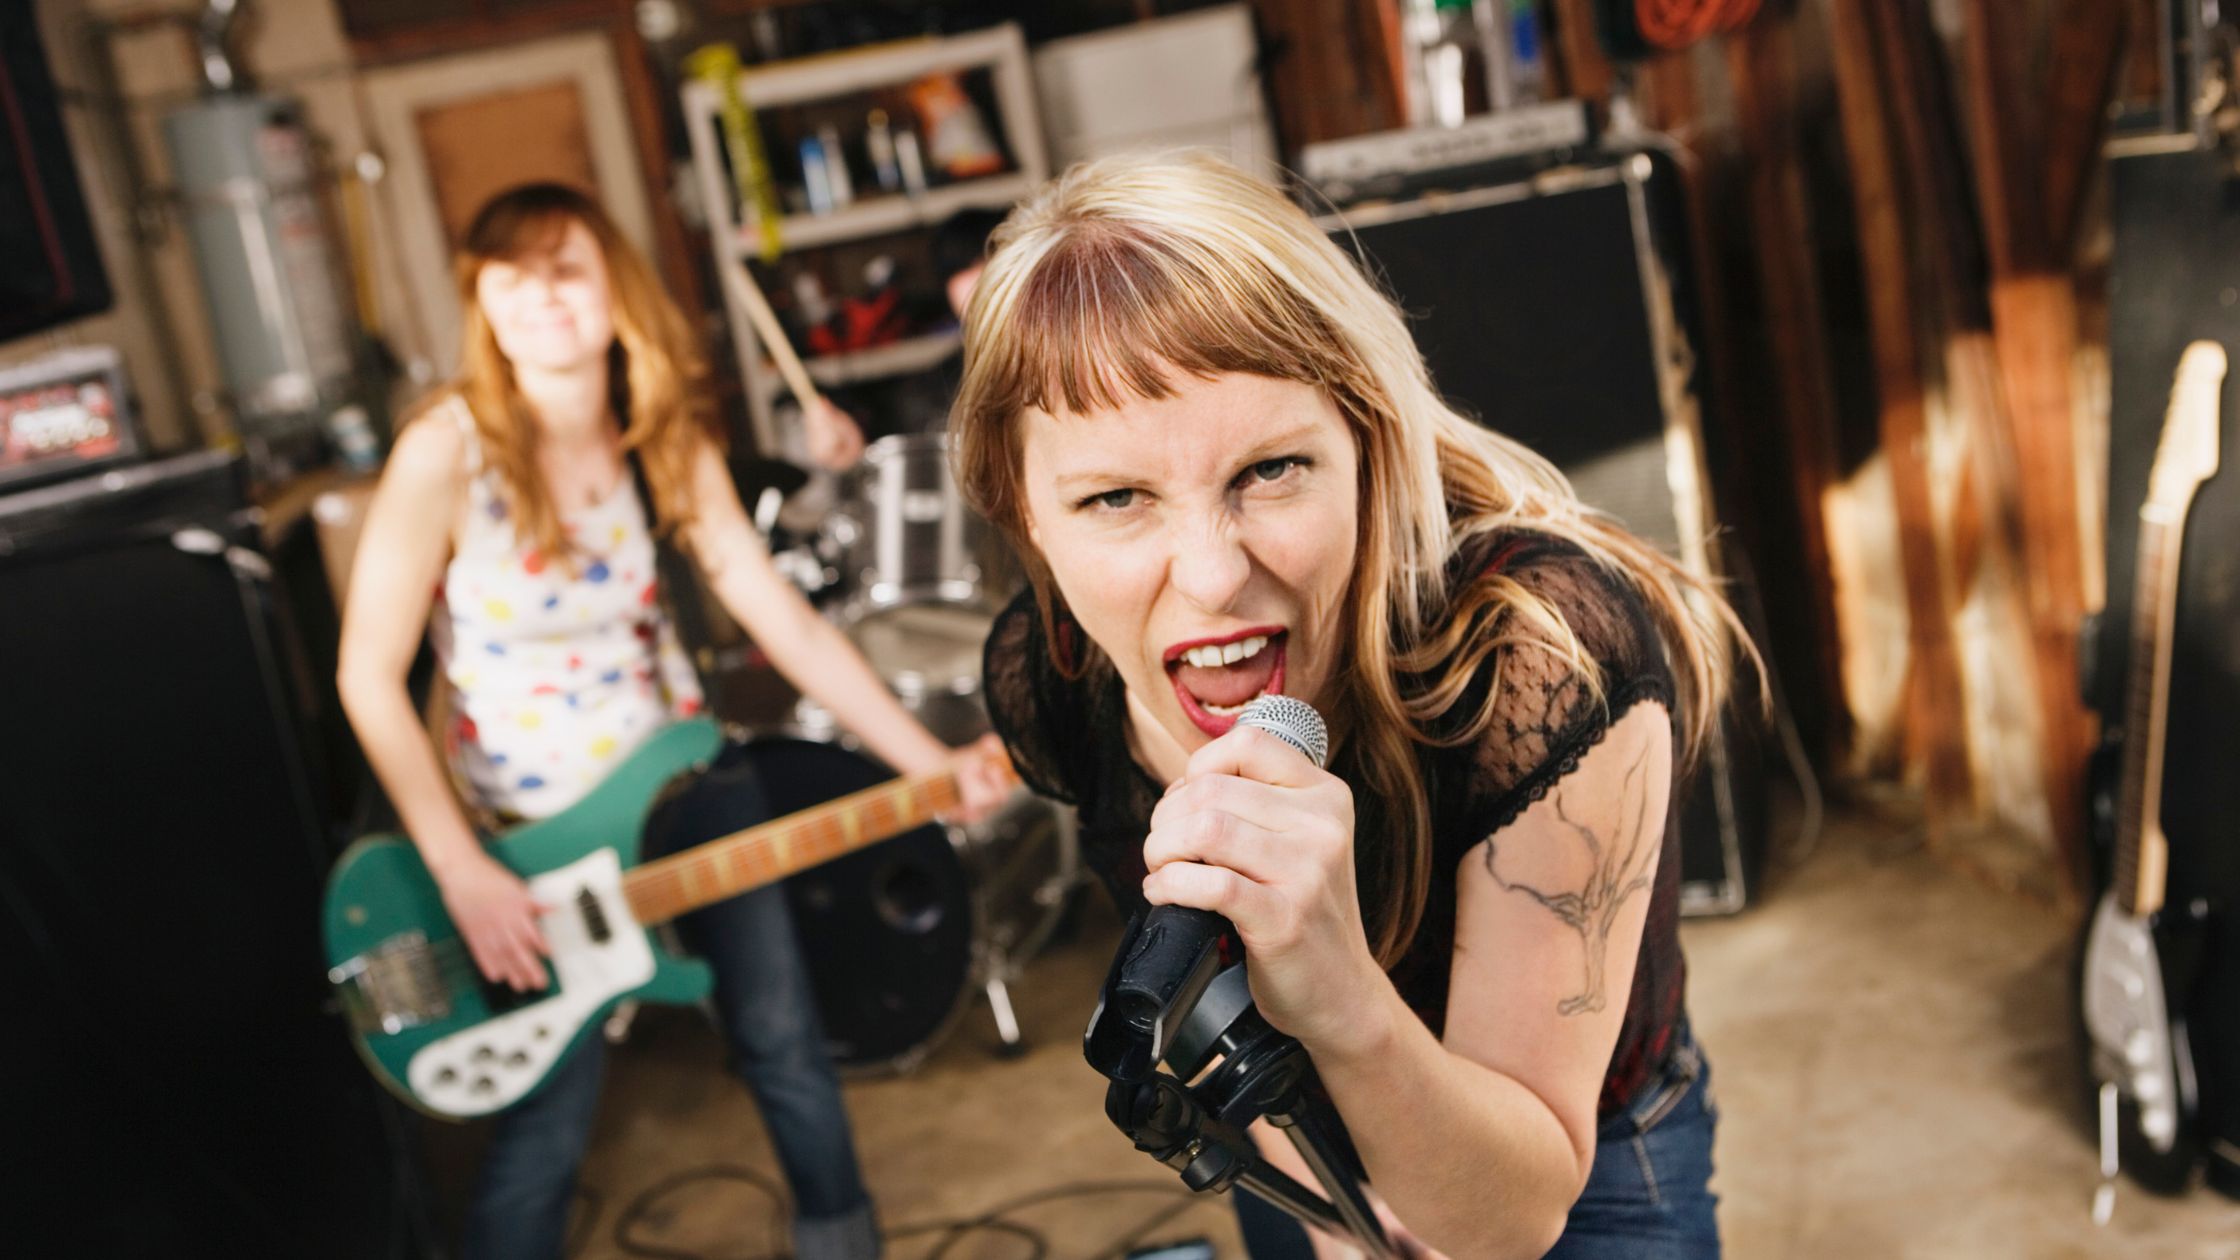 Woman in rock band